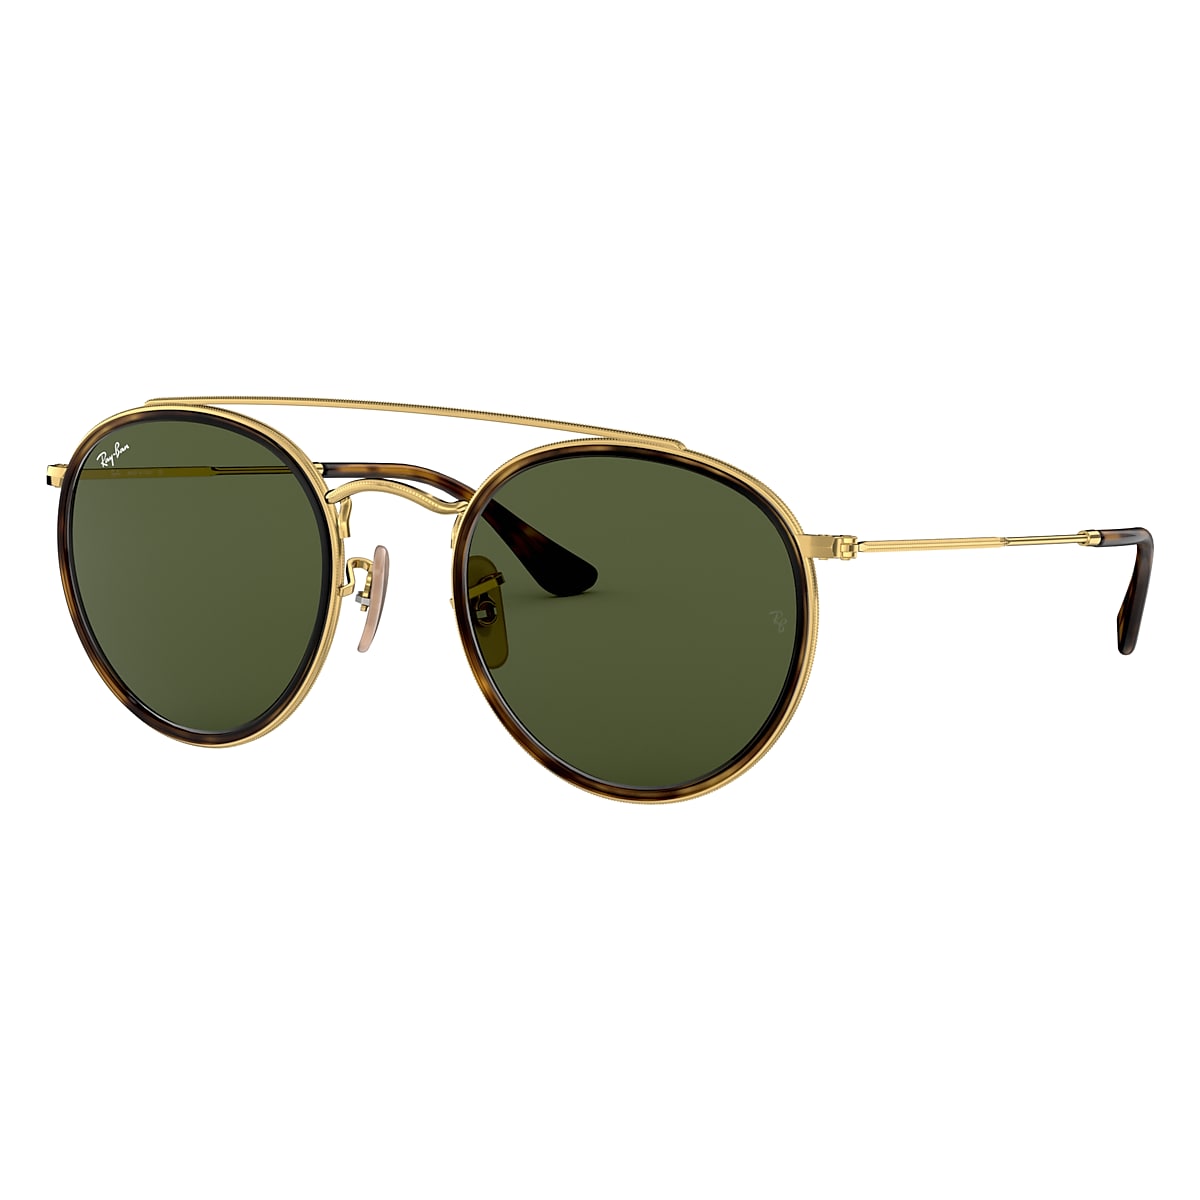 https://images.ray-ban.com/is/image/RayBan/8053672737622_shad_qt.png?impolicy=SEO_1x1